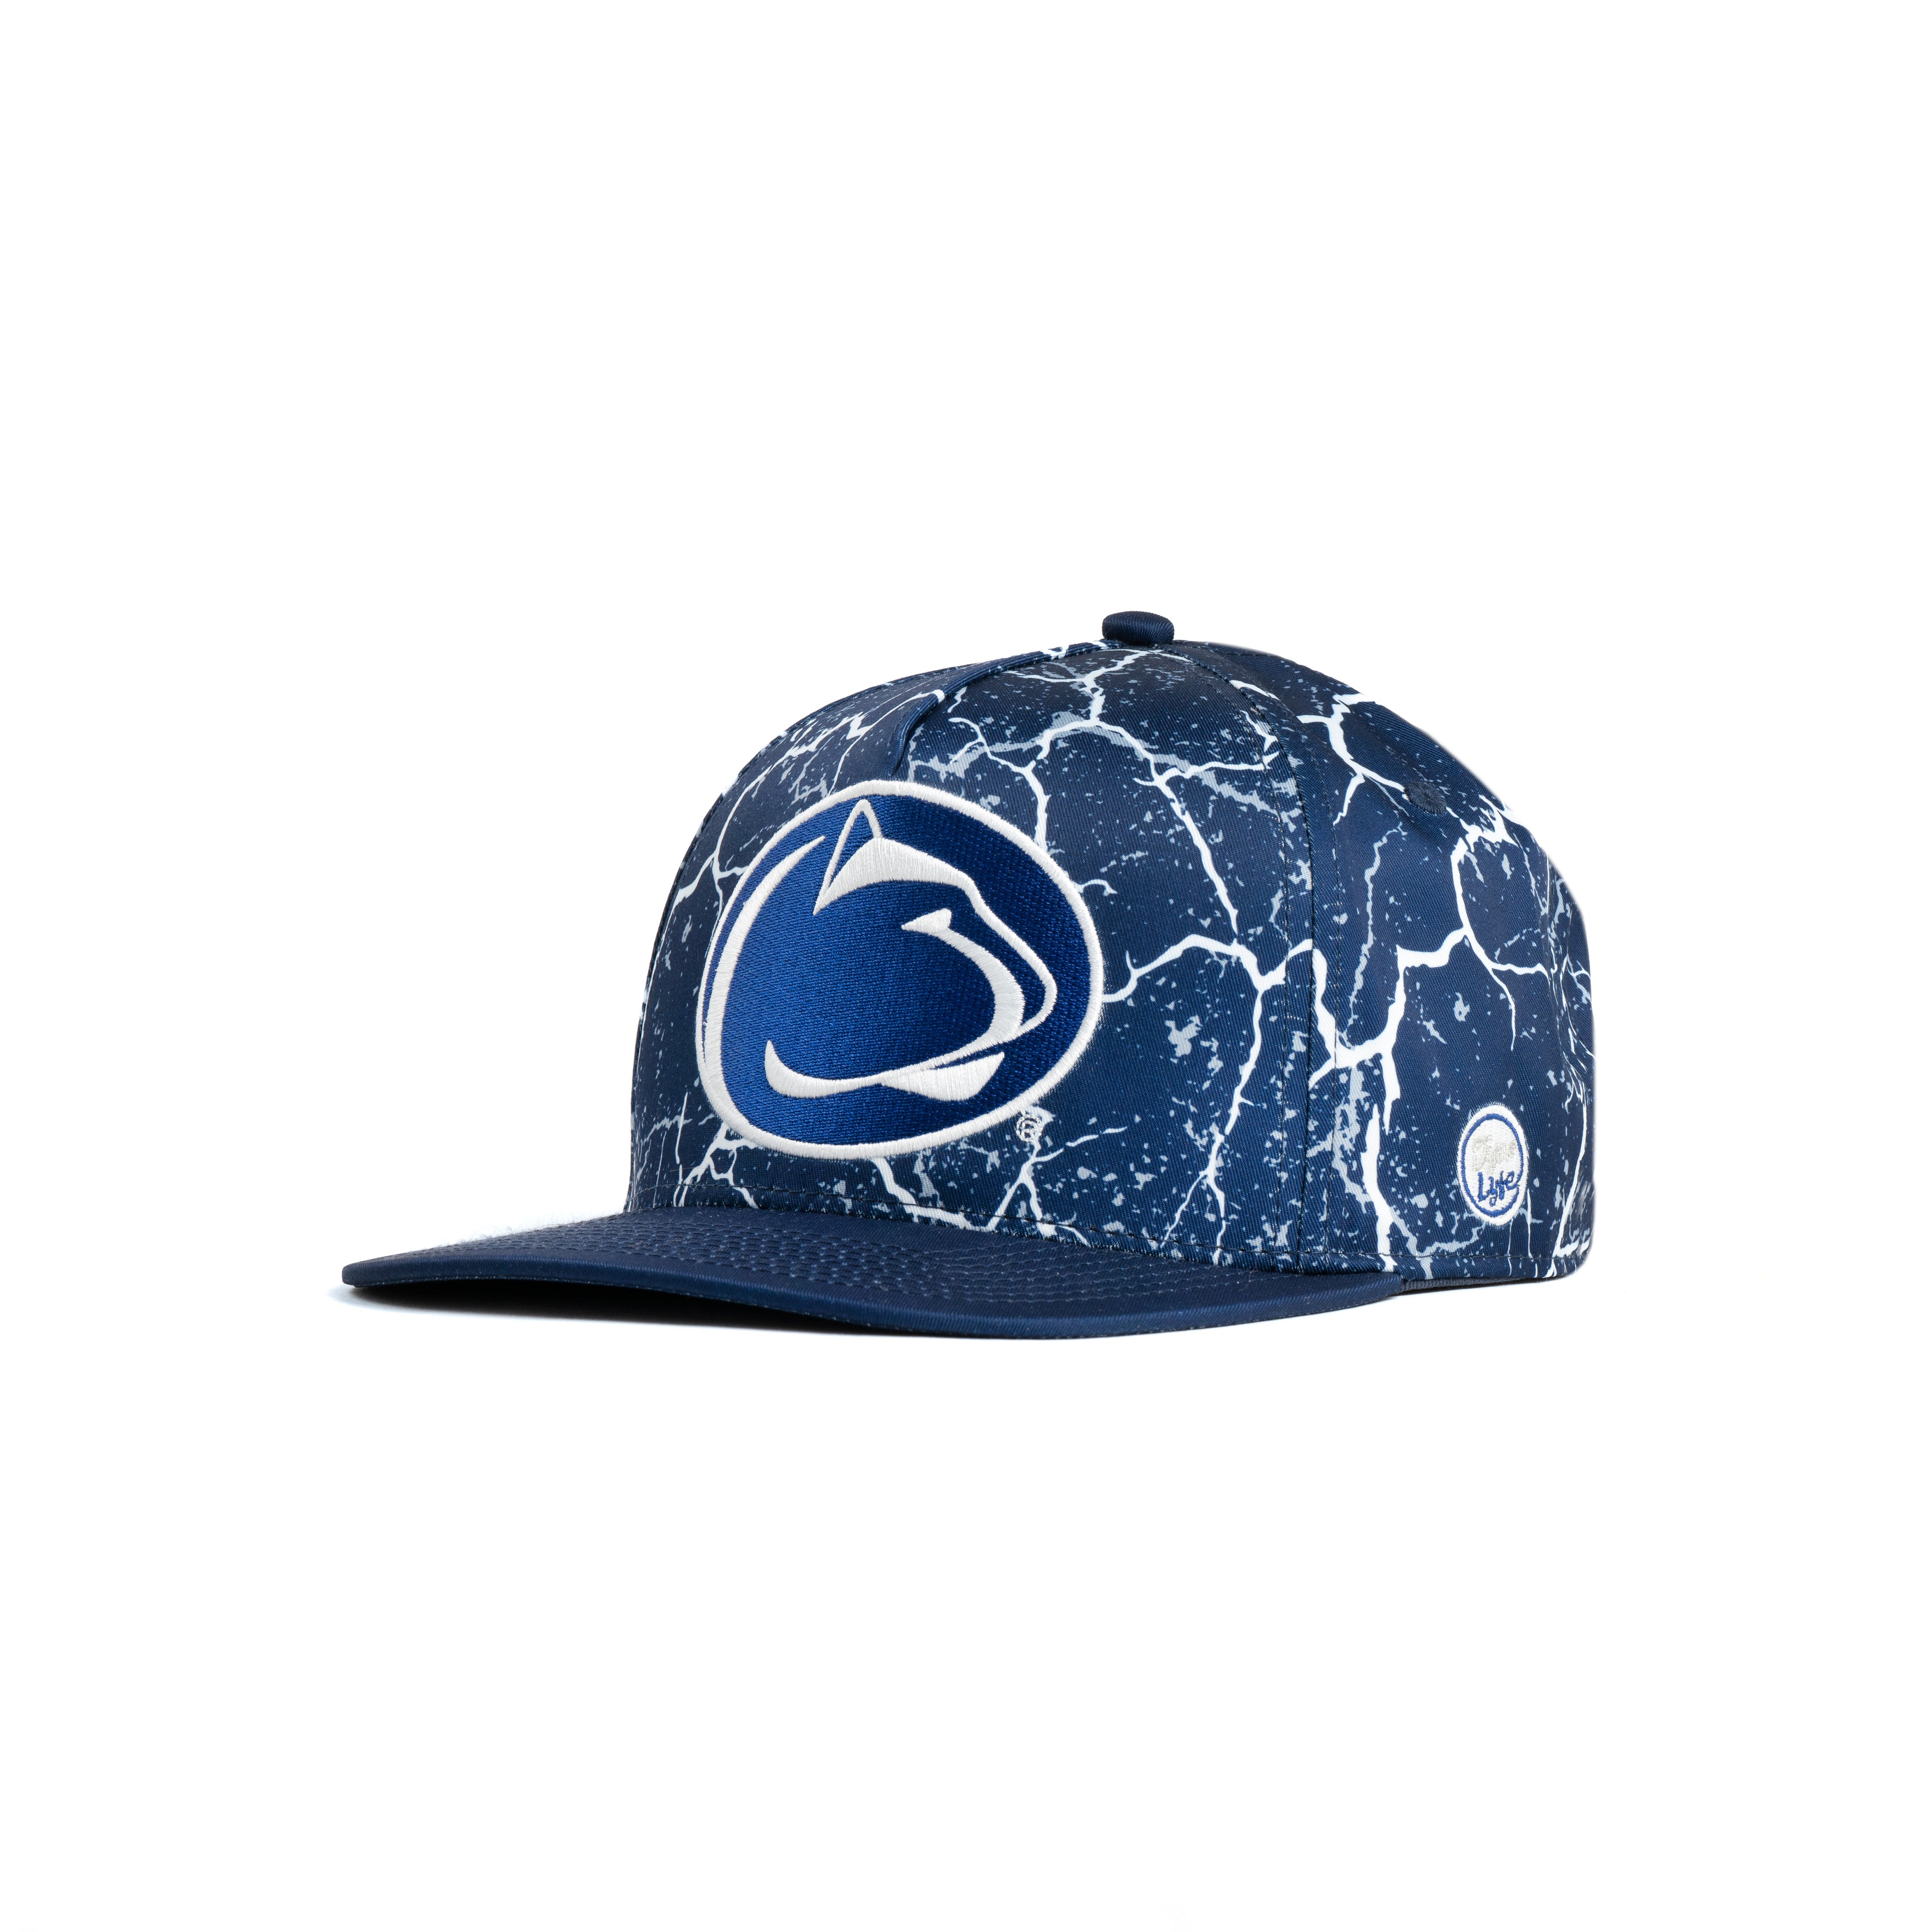 Penn State Nittany Lions Storm Snapback